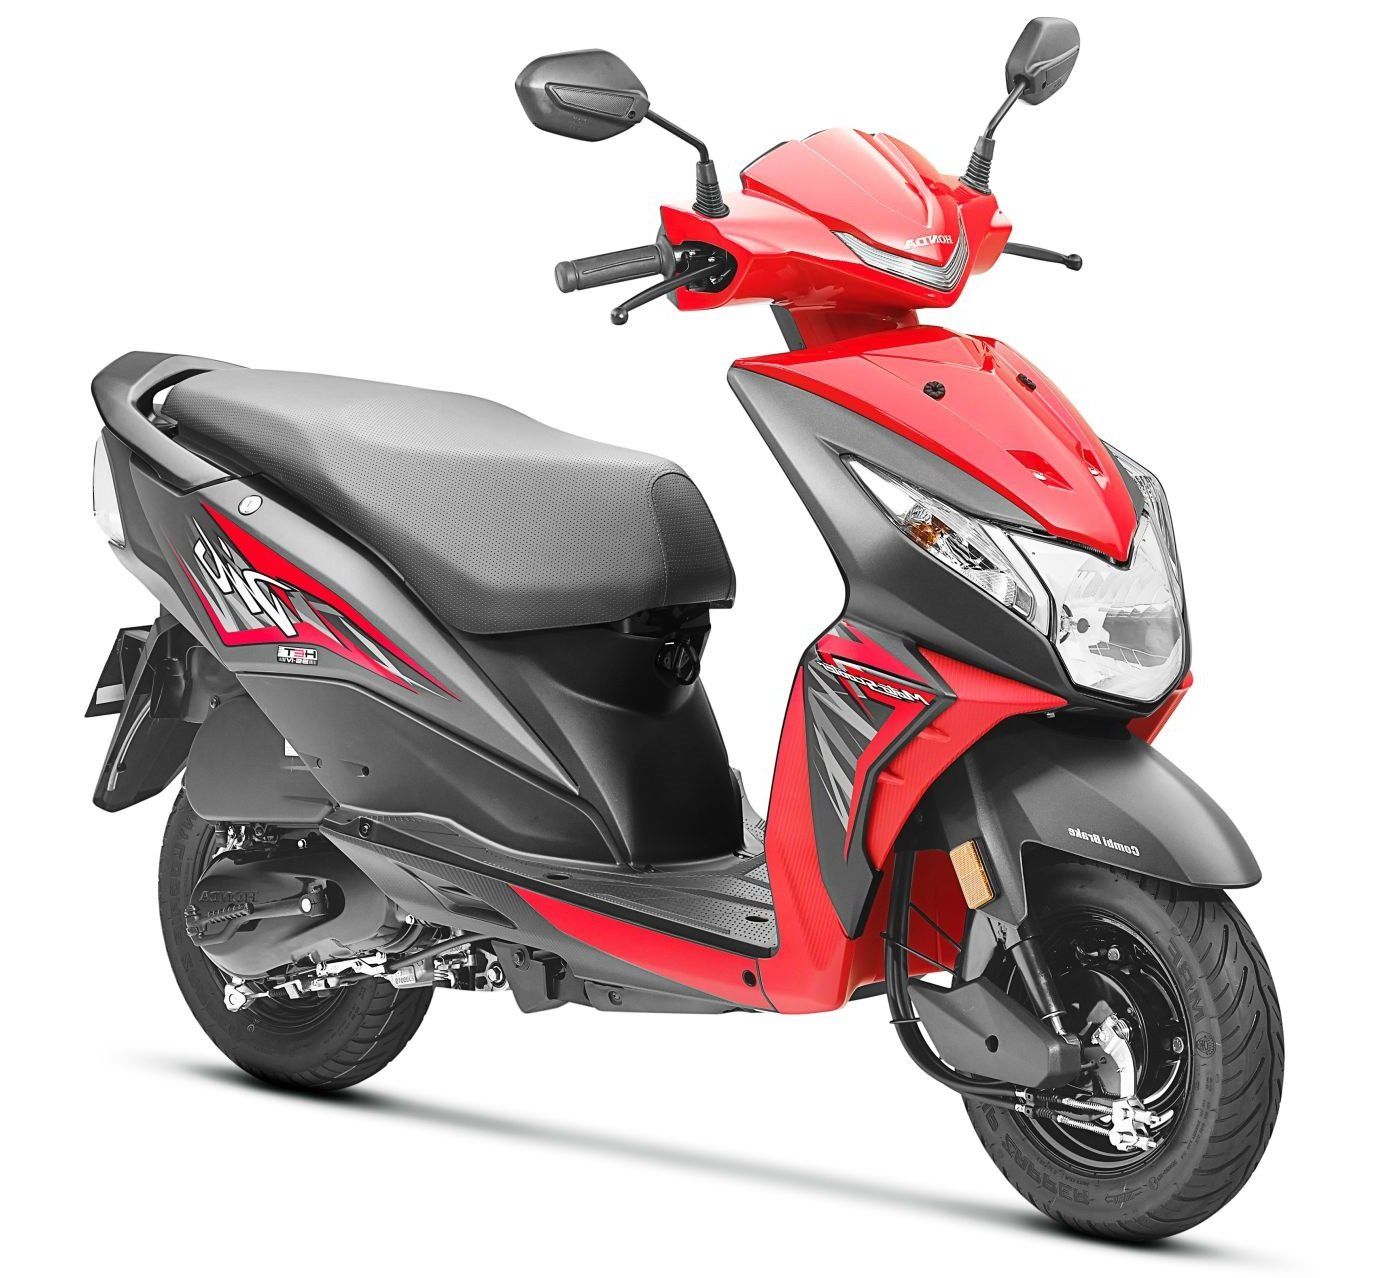 Honda Dio Price in India, Dio Mileage, Image, Specifications, bike scooty, 2018 new model, all of